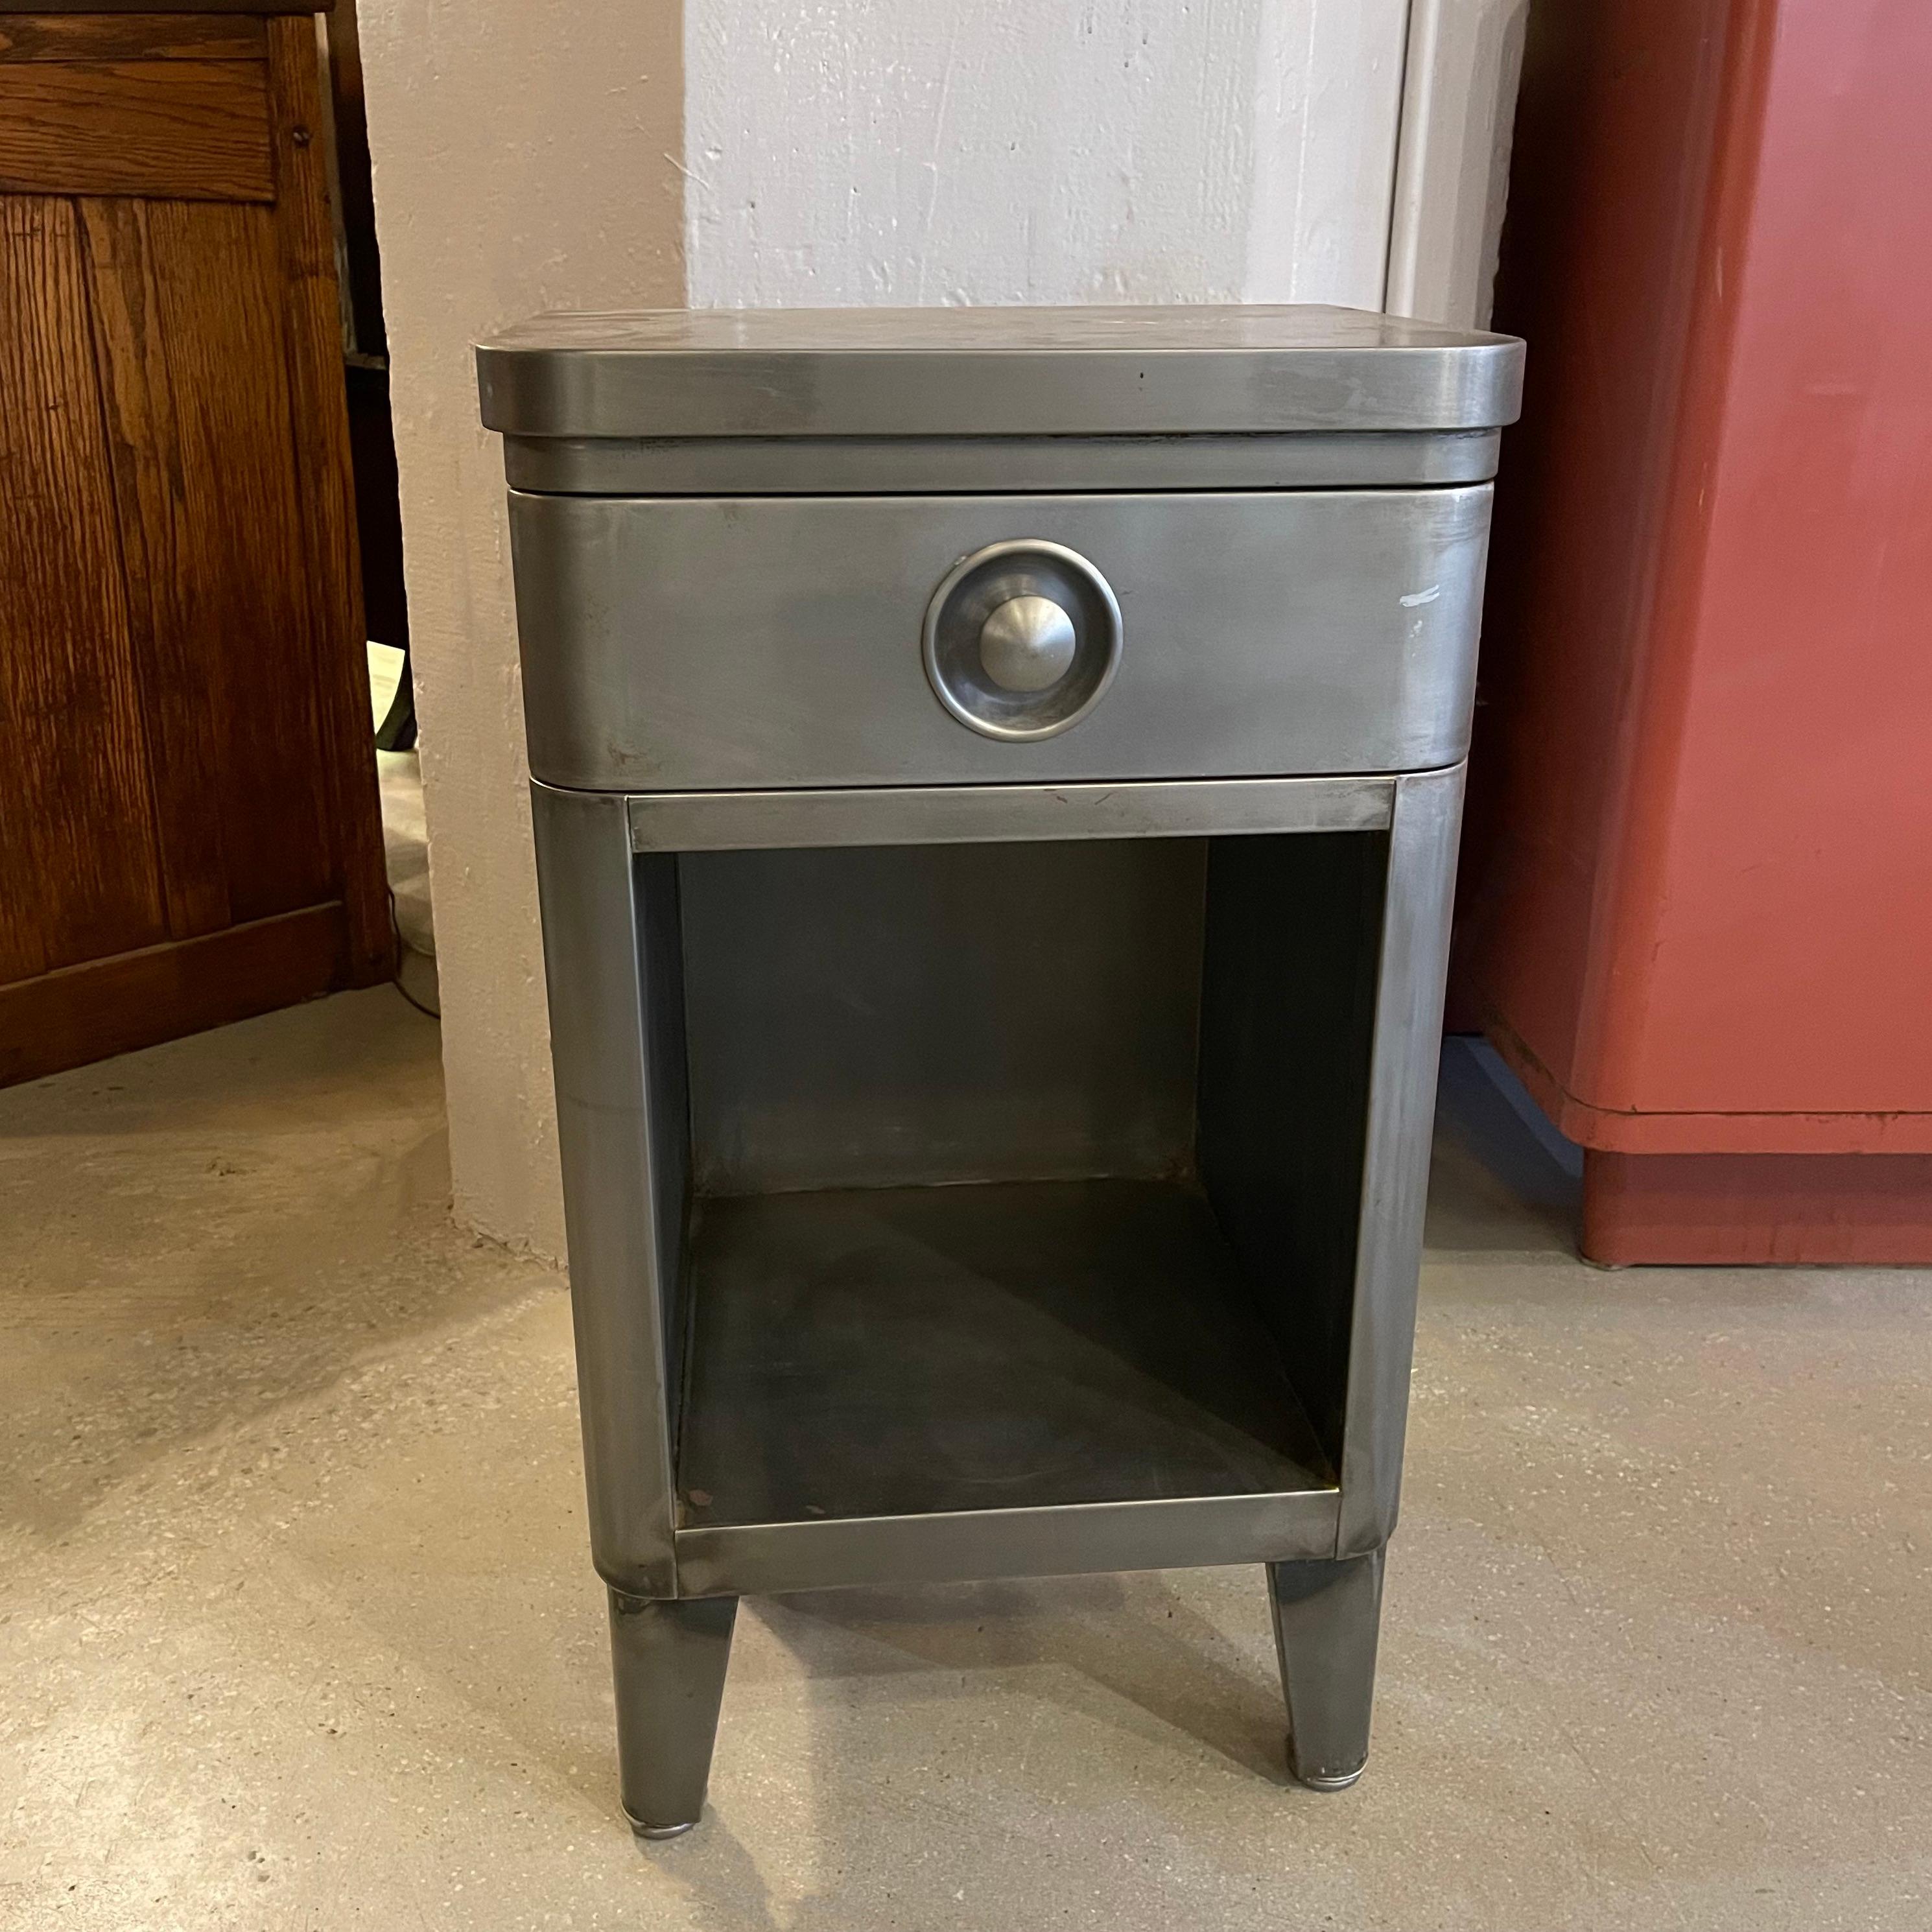 Machine-age, art deco, brushed steel nightstand or end table by Norman Bel Geddes for Simmons Company Furniture features a 3